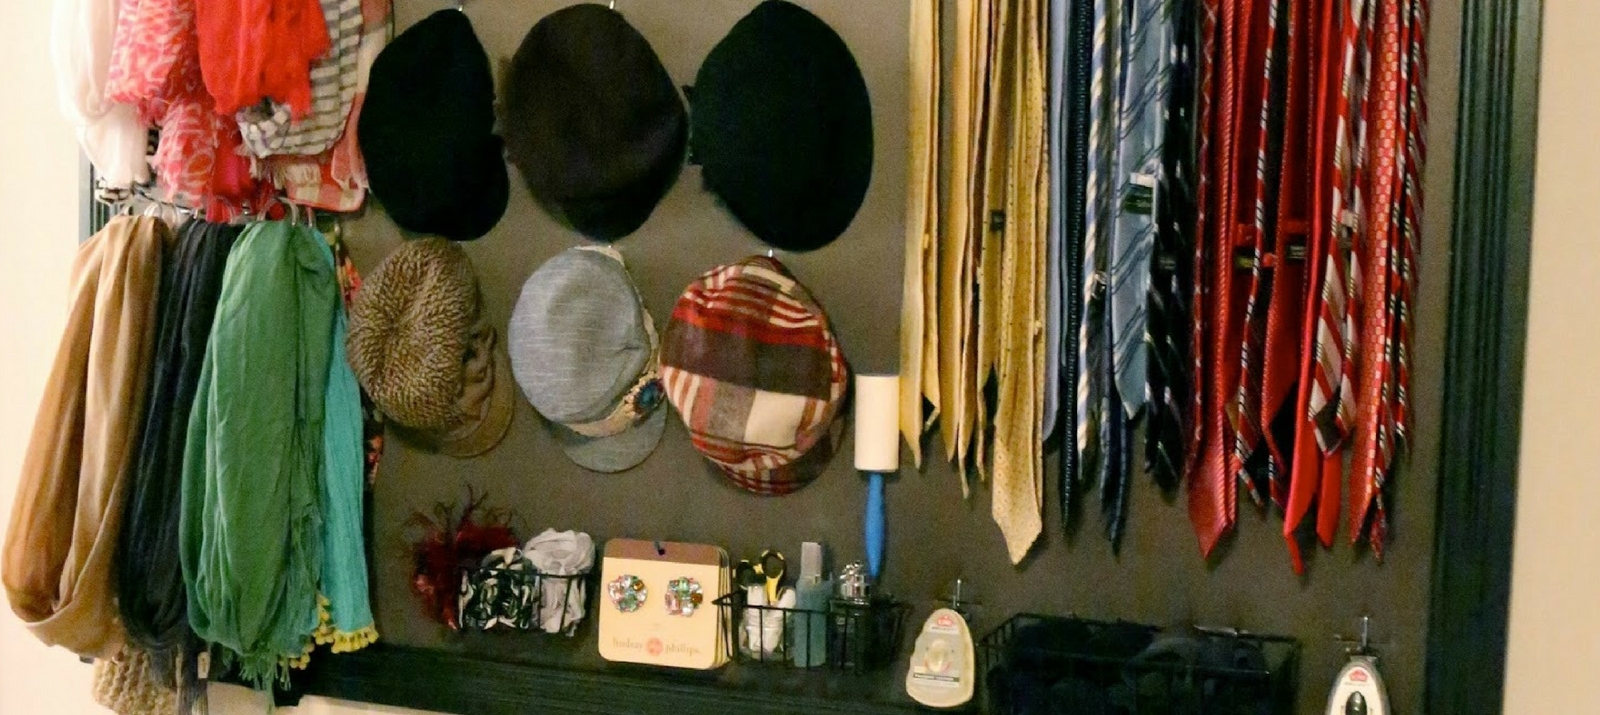 diy storage ideas and solutions: a his and hers closet organizer